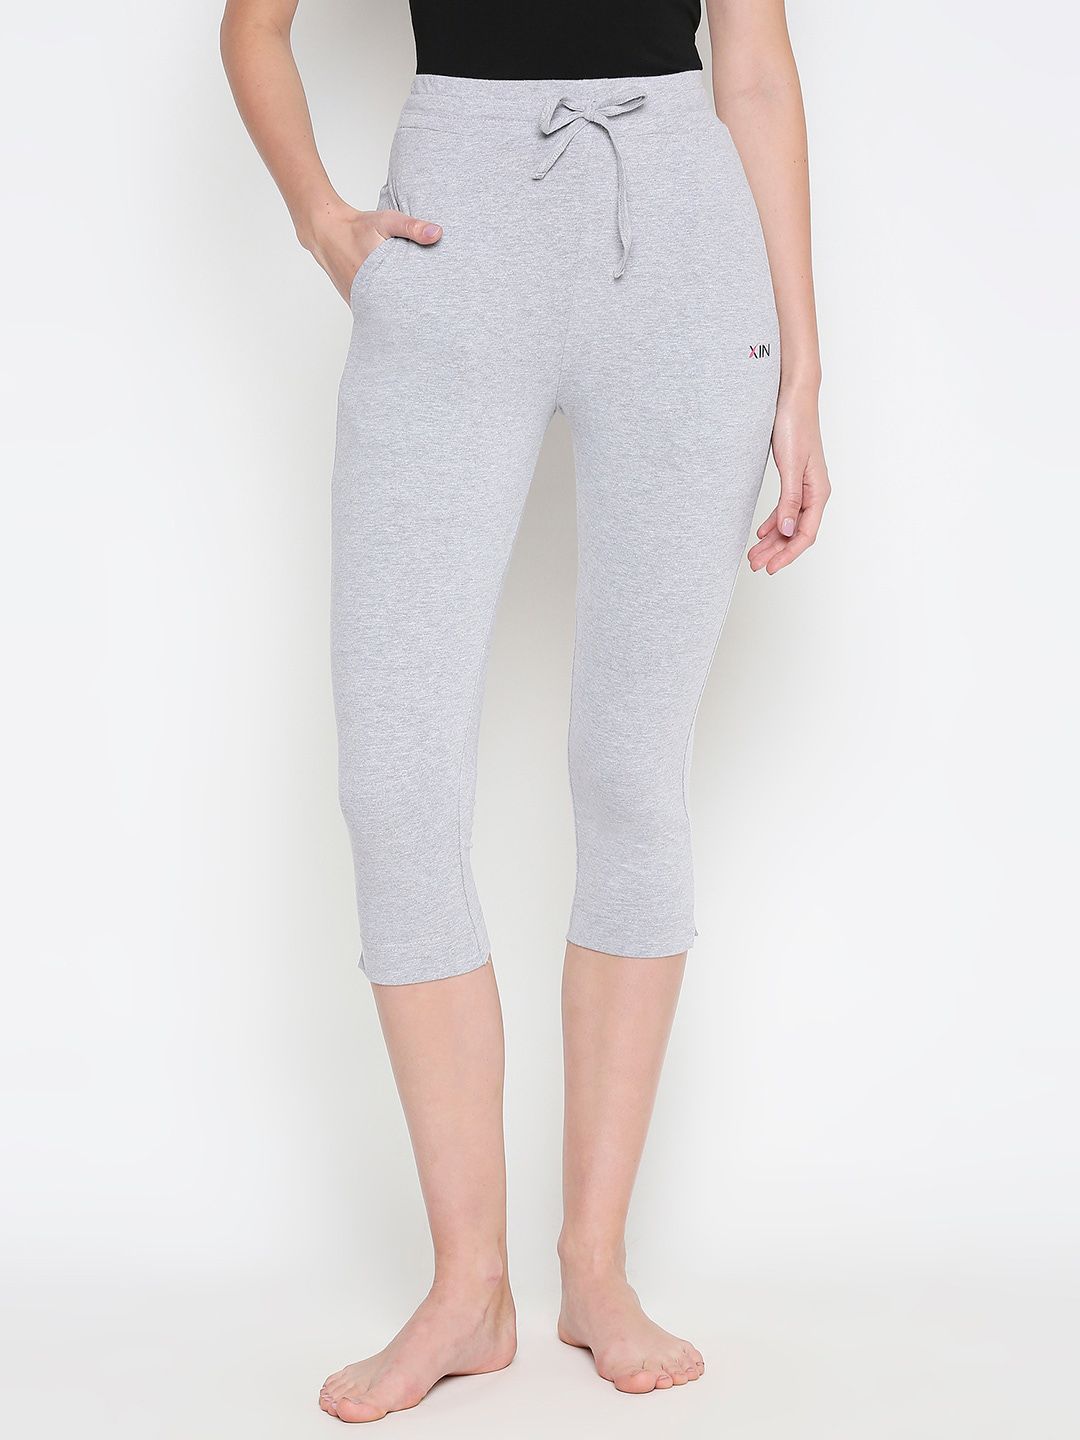 XIN Women Grey Solid Lounge Capris Price in India